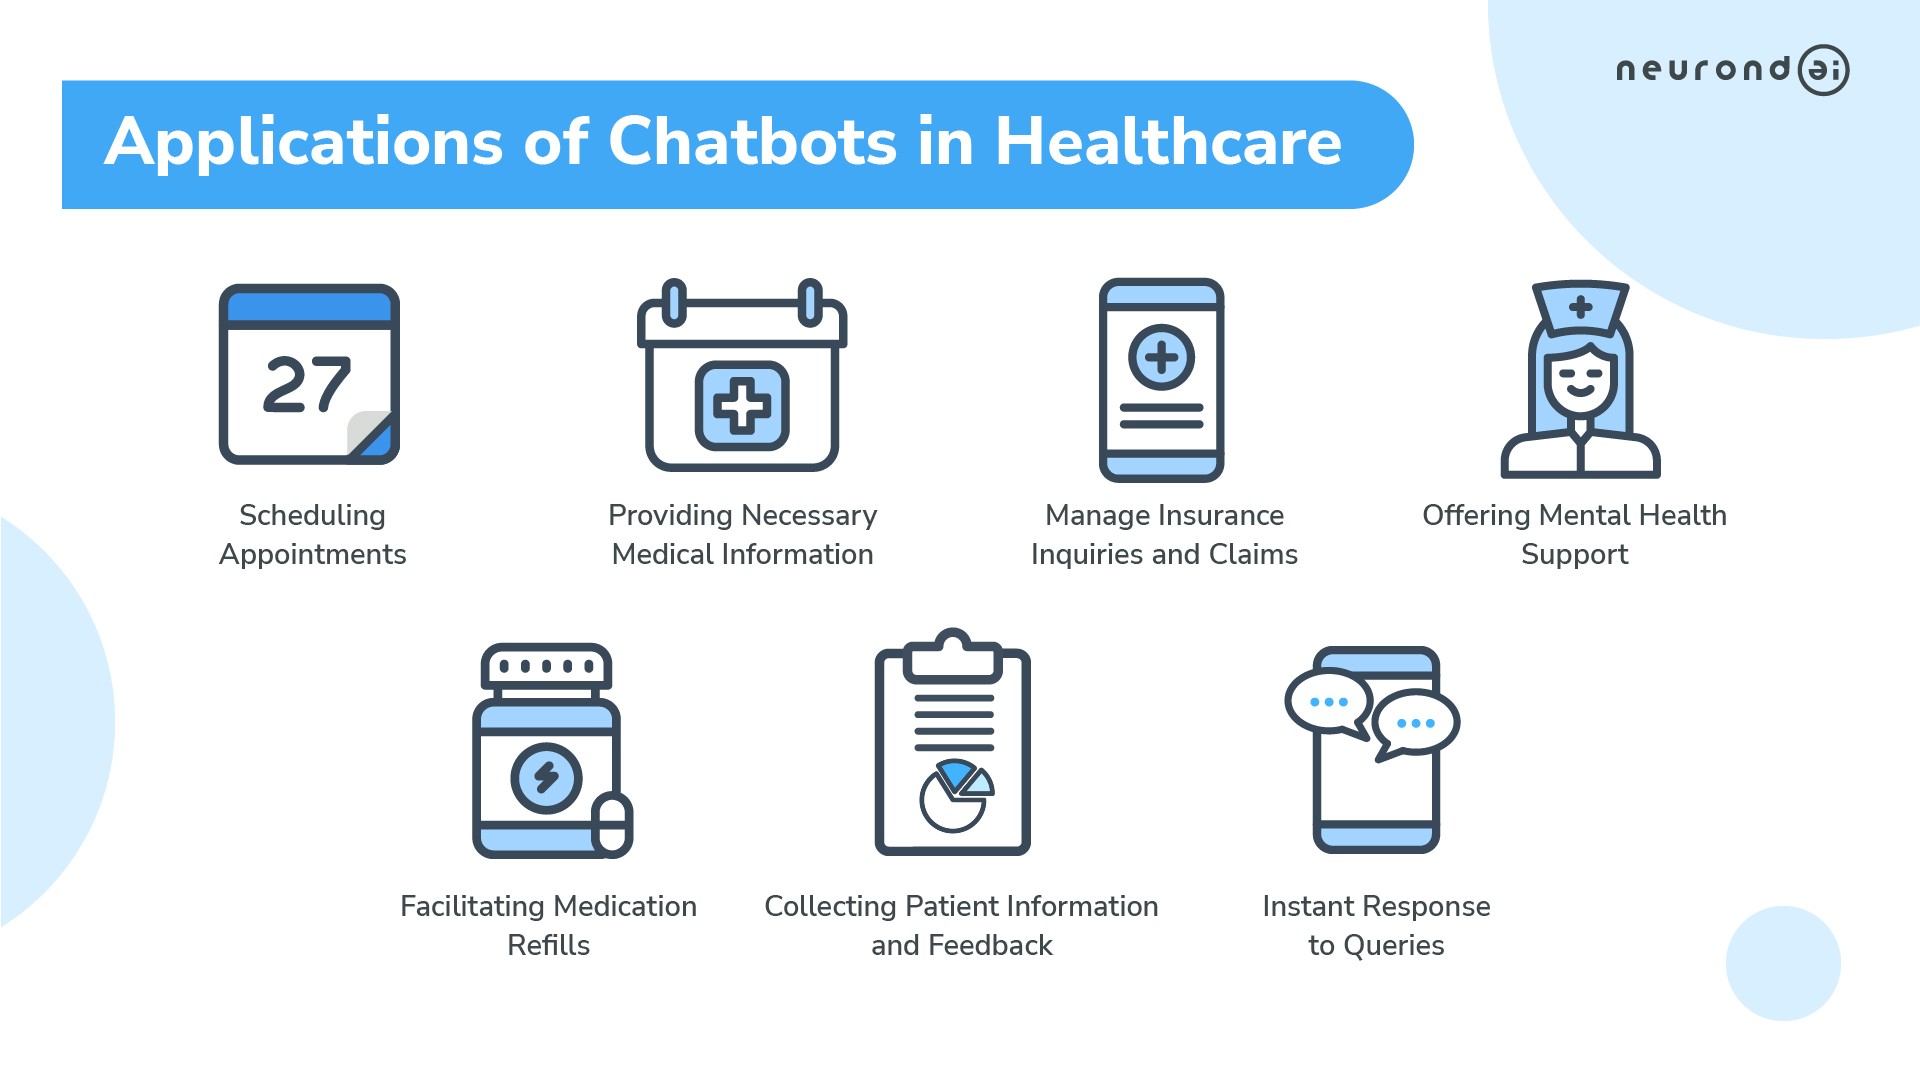 Top 7 Uses of Chatbots in Healthcare